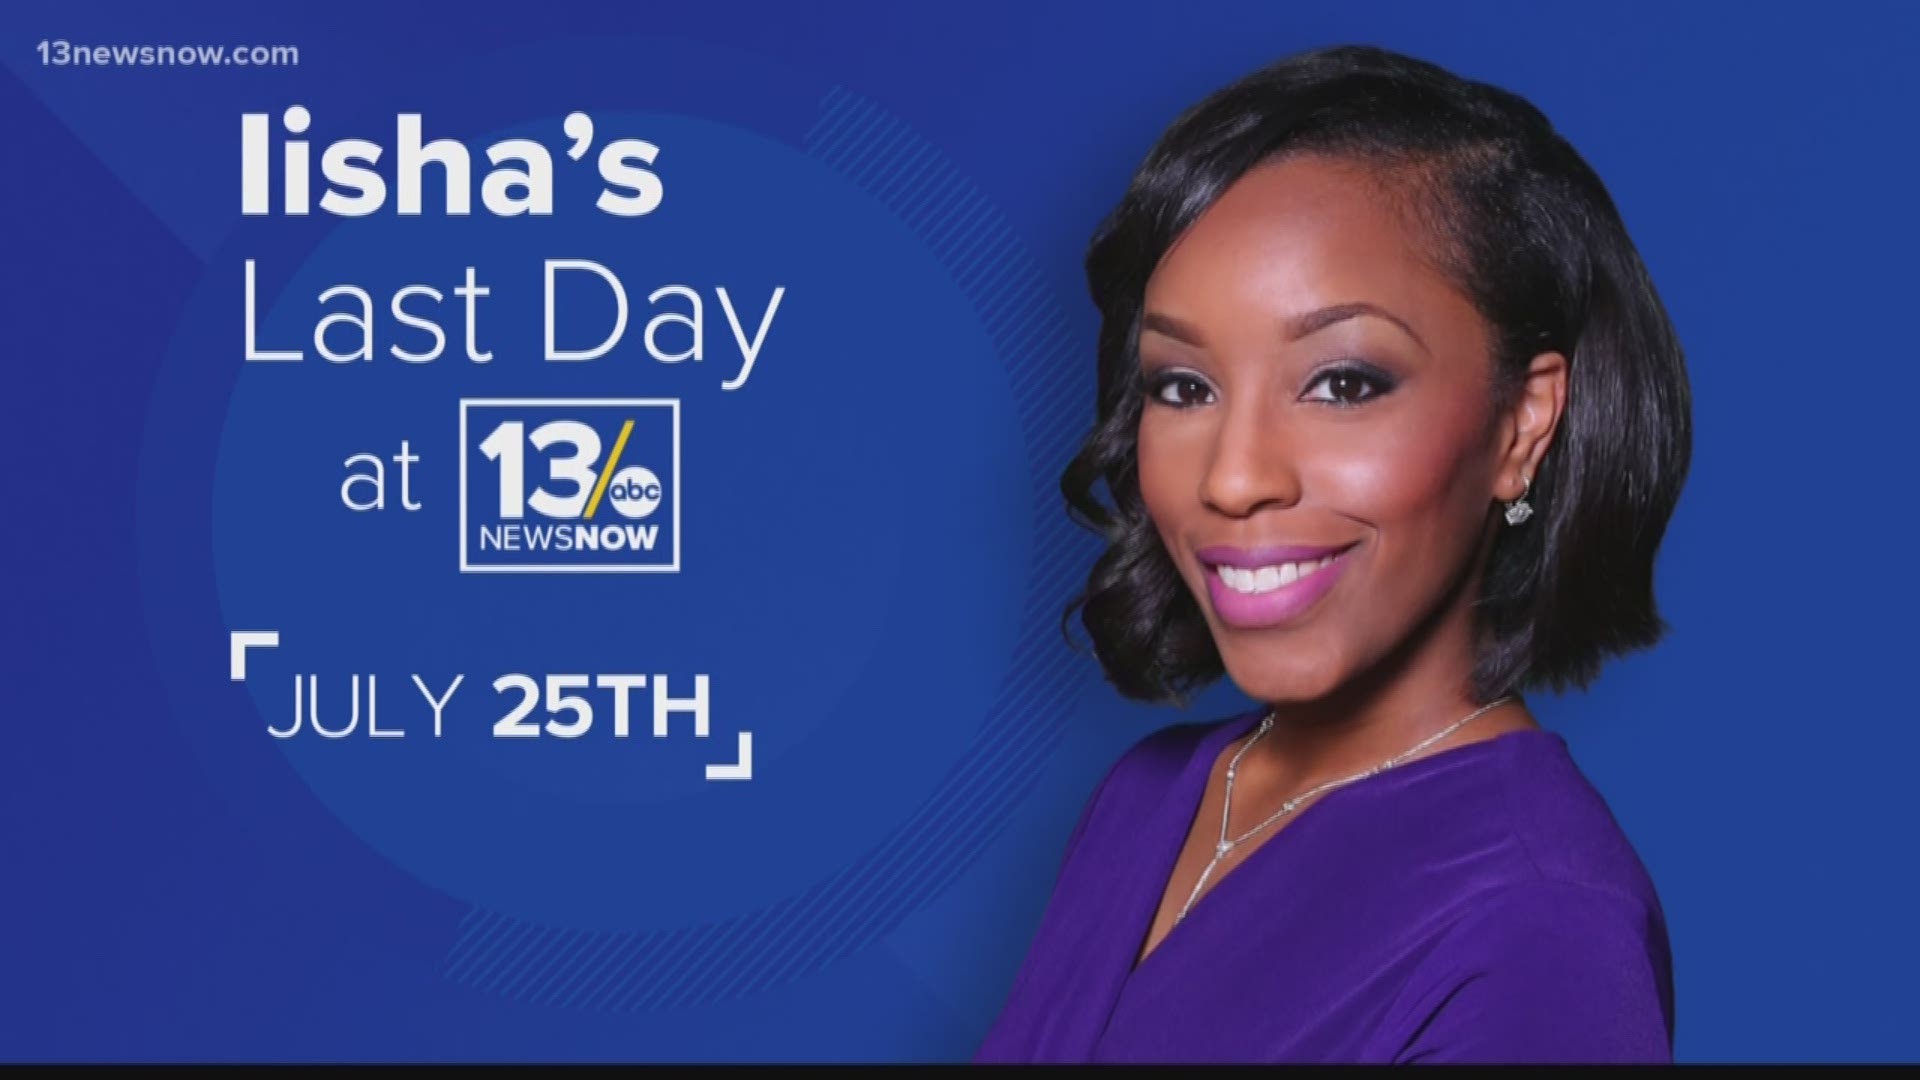 13News Now Meteorologist Iisha Scott will be leaving 13News Now. Her last day is July 25.